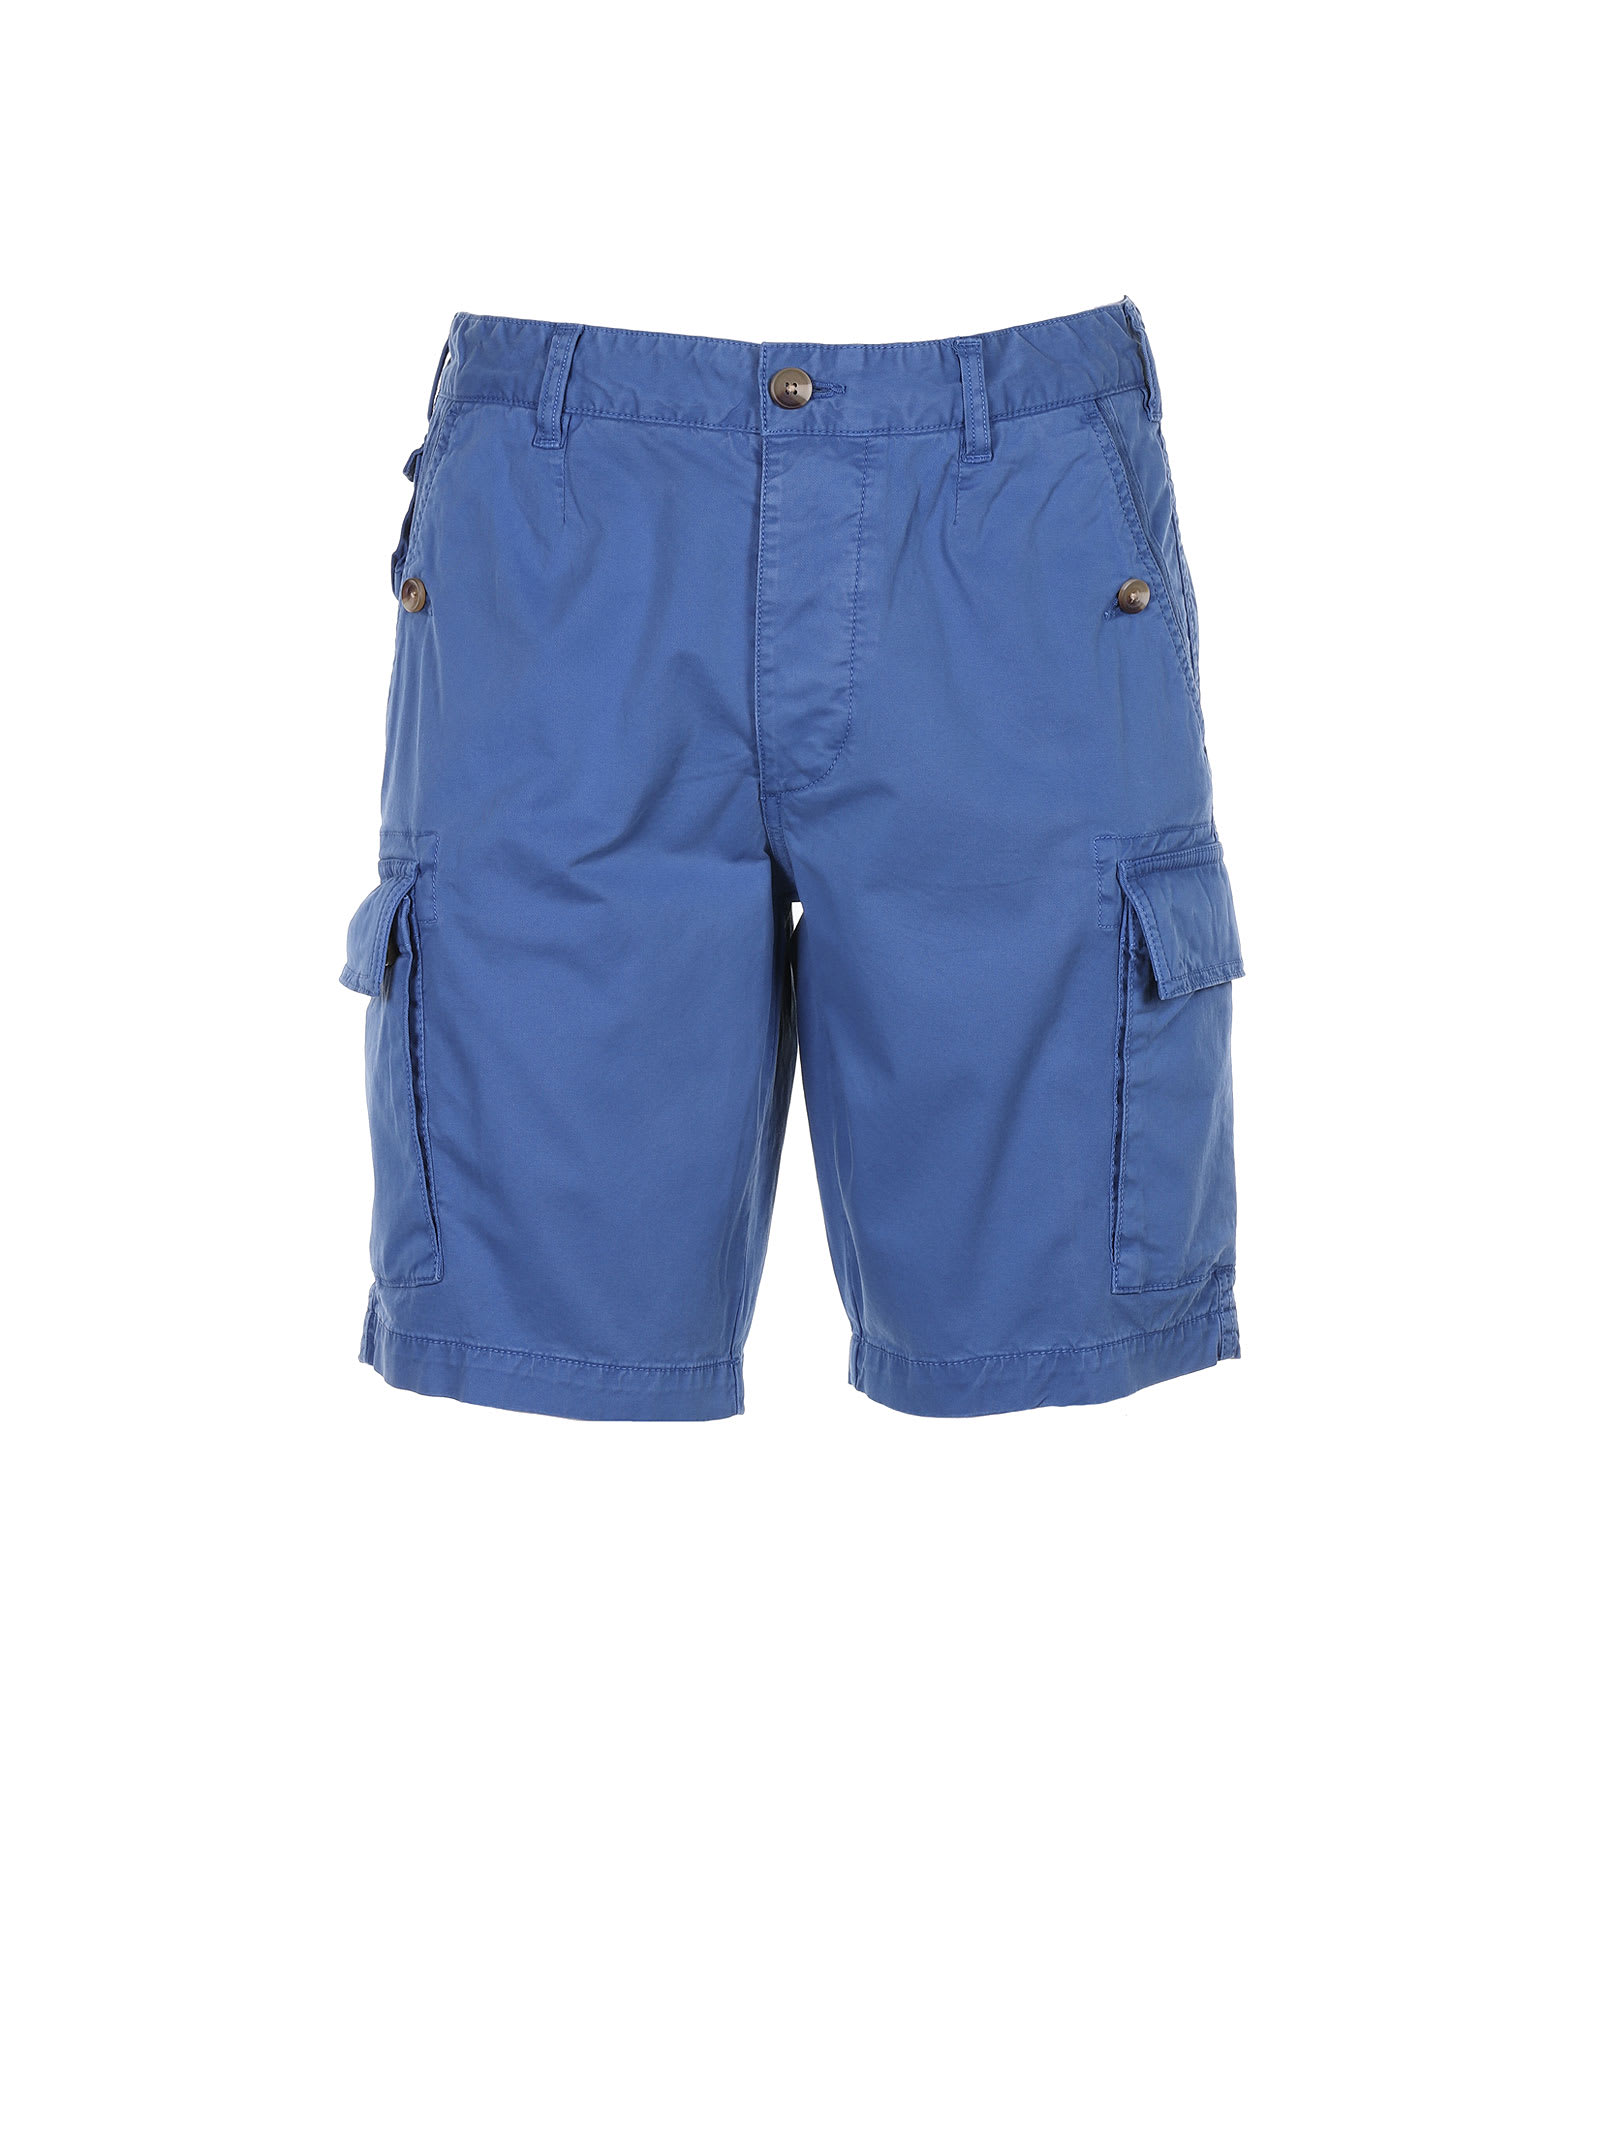 BLAUER SHORTS WITH SIDE POCKETS,21SBLUP4247 006000801